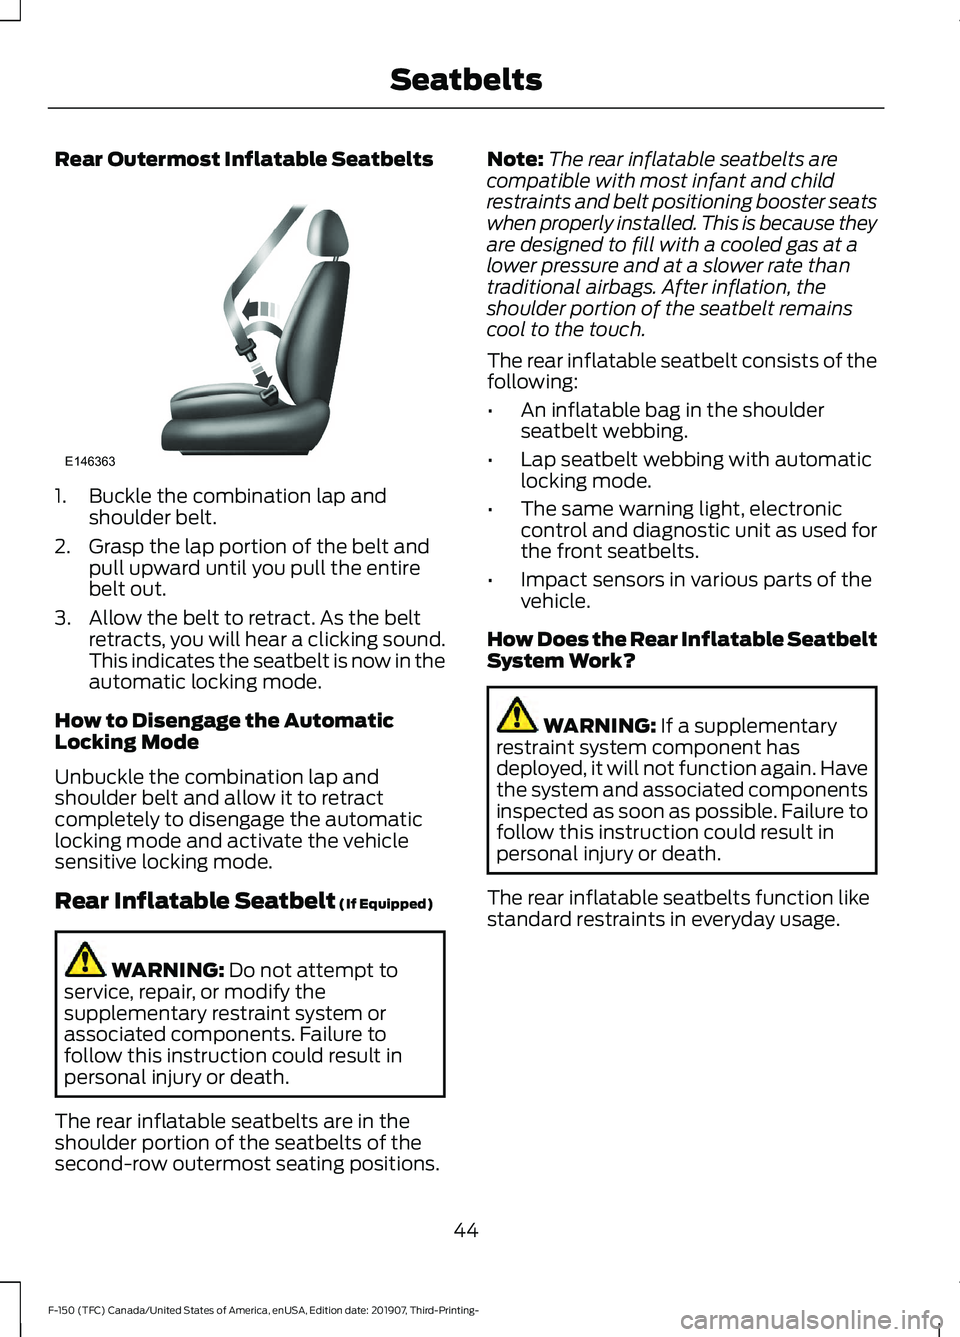 FORD F-150 2020  Owners Manual Rear Outermost Inflatable Seatbelts
1. Buckle the combination lap and
shoulder belt.
2. Grasp the lap portion of the belt and pull upward until you pull the entire
belt out.
3. Allow the belt to retra